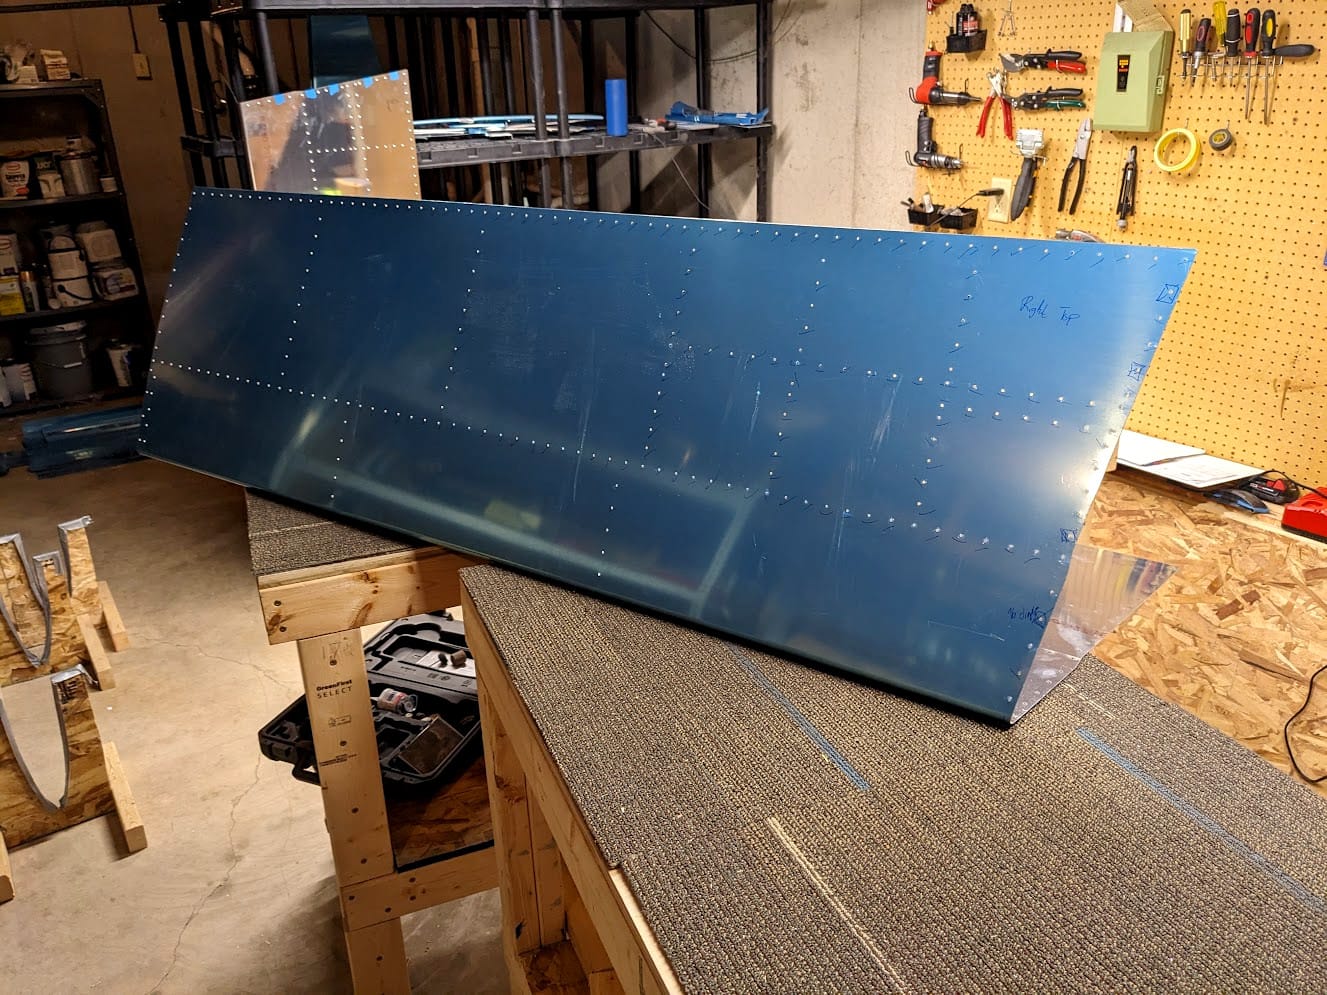 Riveting, Bankruptcy, and the Horizontal Stabilizer